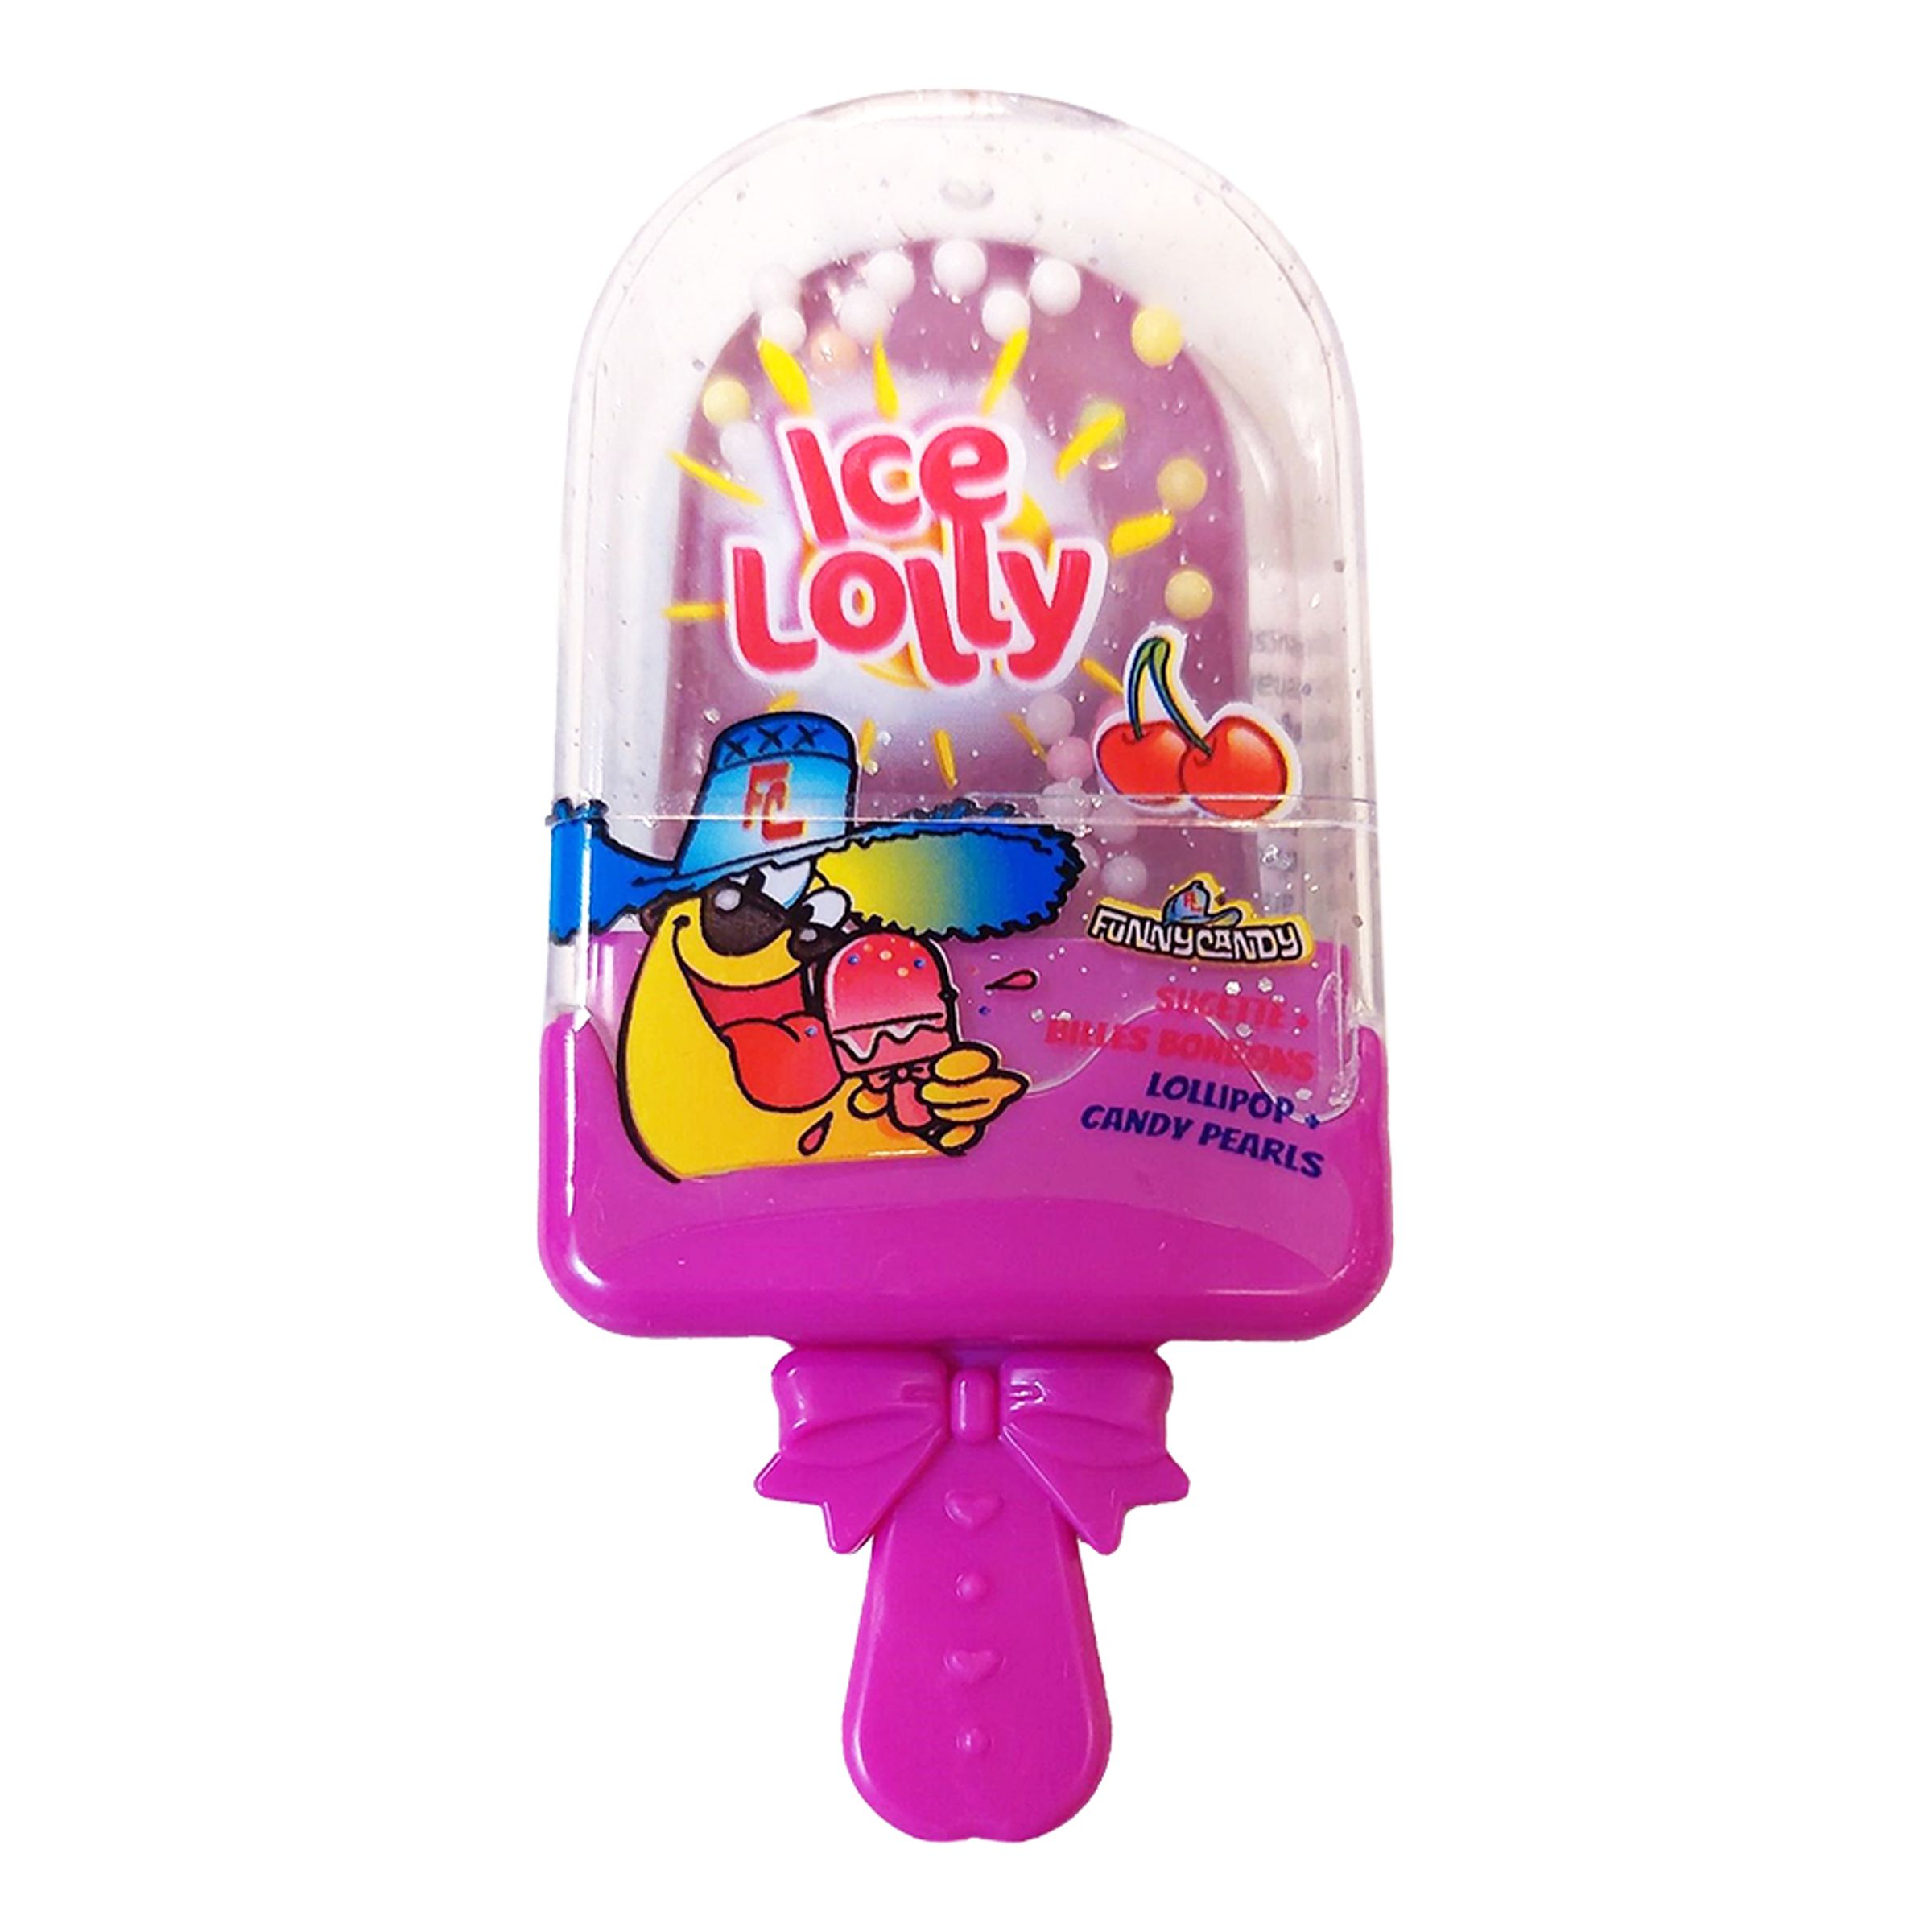 Ice Lolly Candy - 16 gram